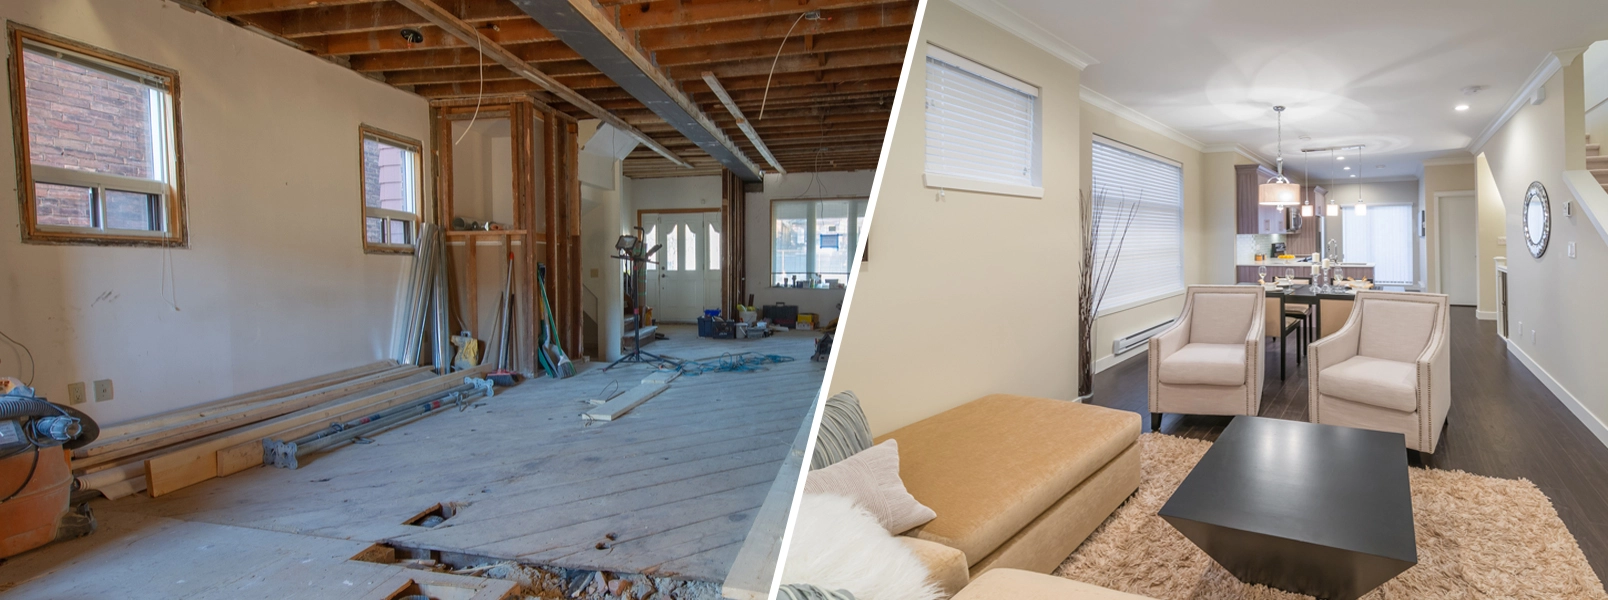 townhouse-under-renovation-before-and-after-1